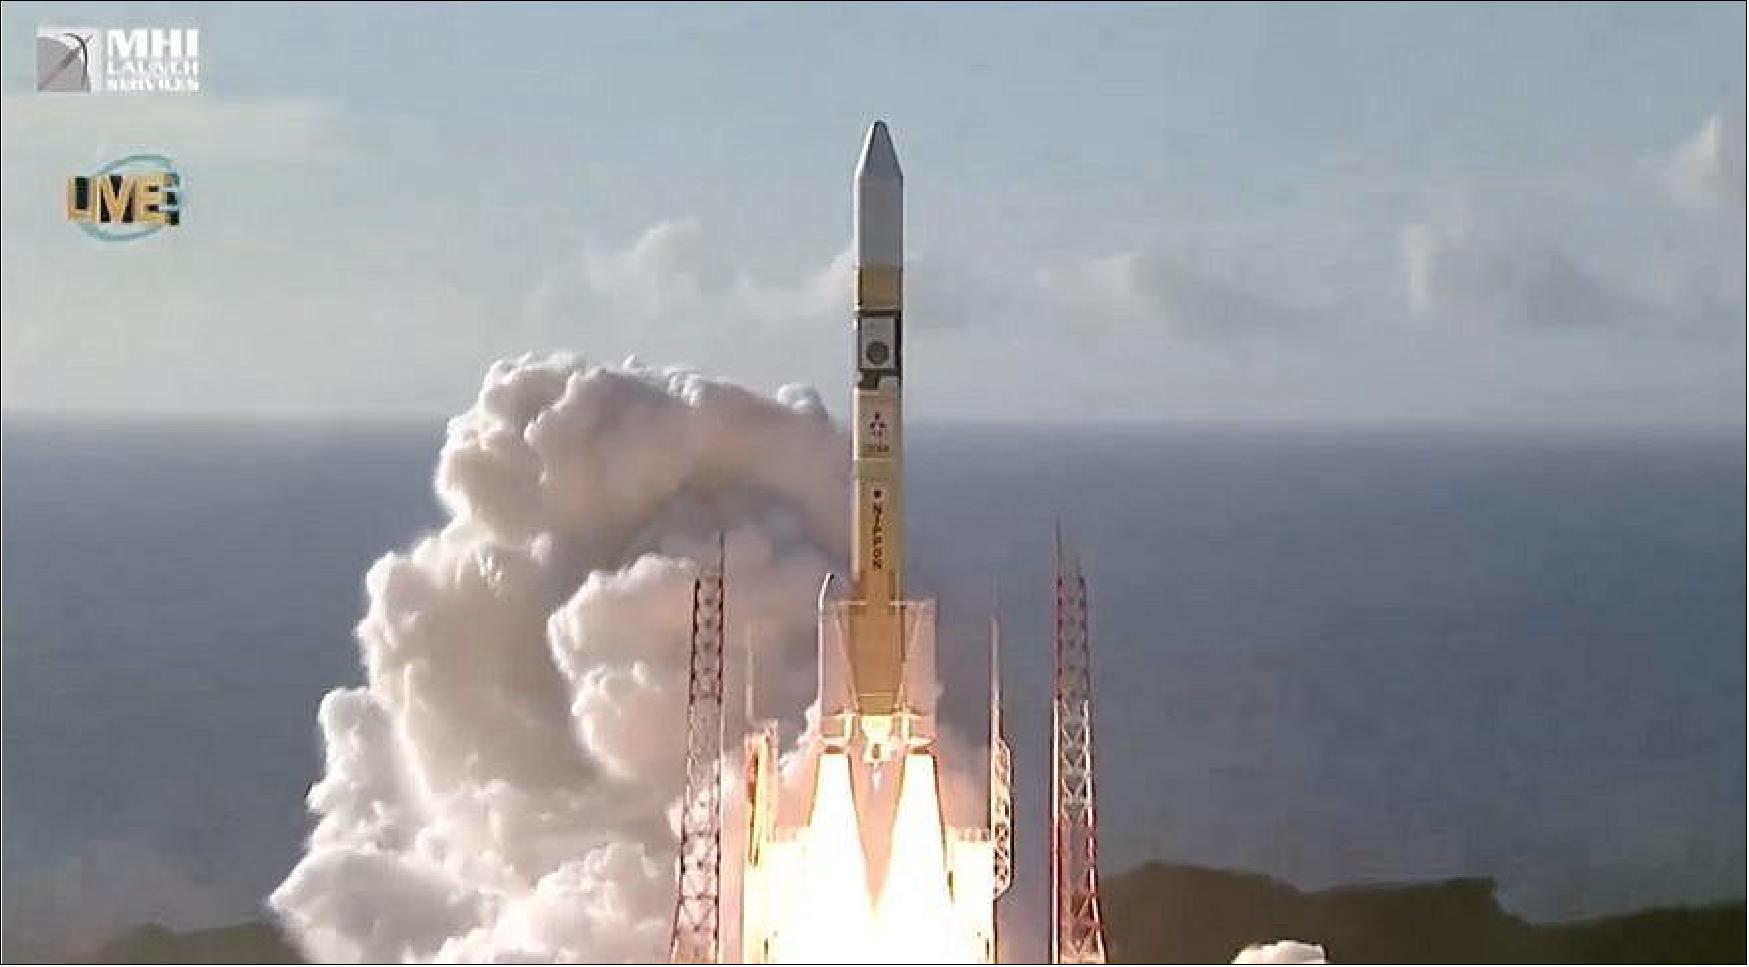 Figure 6: The H-IIA rocket carrying the UAE's Hope Mars orbiter mission lifts off on 19 July 2020 (image credit: MHI webcast)